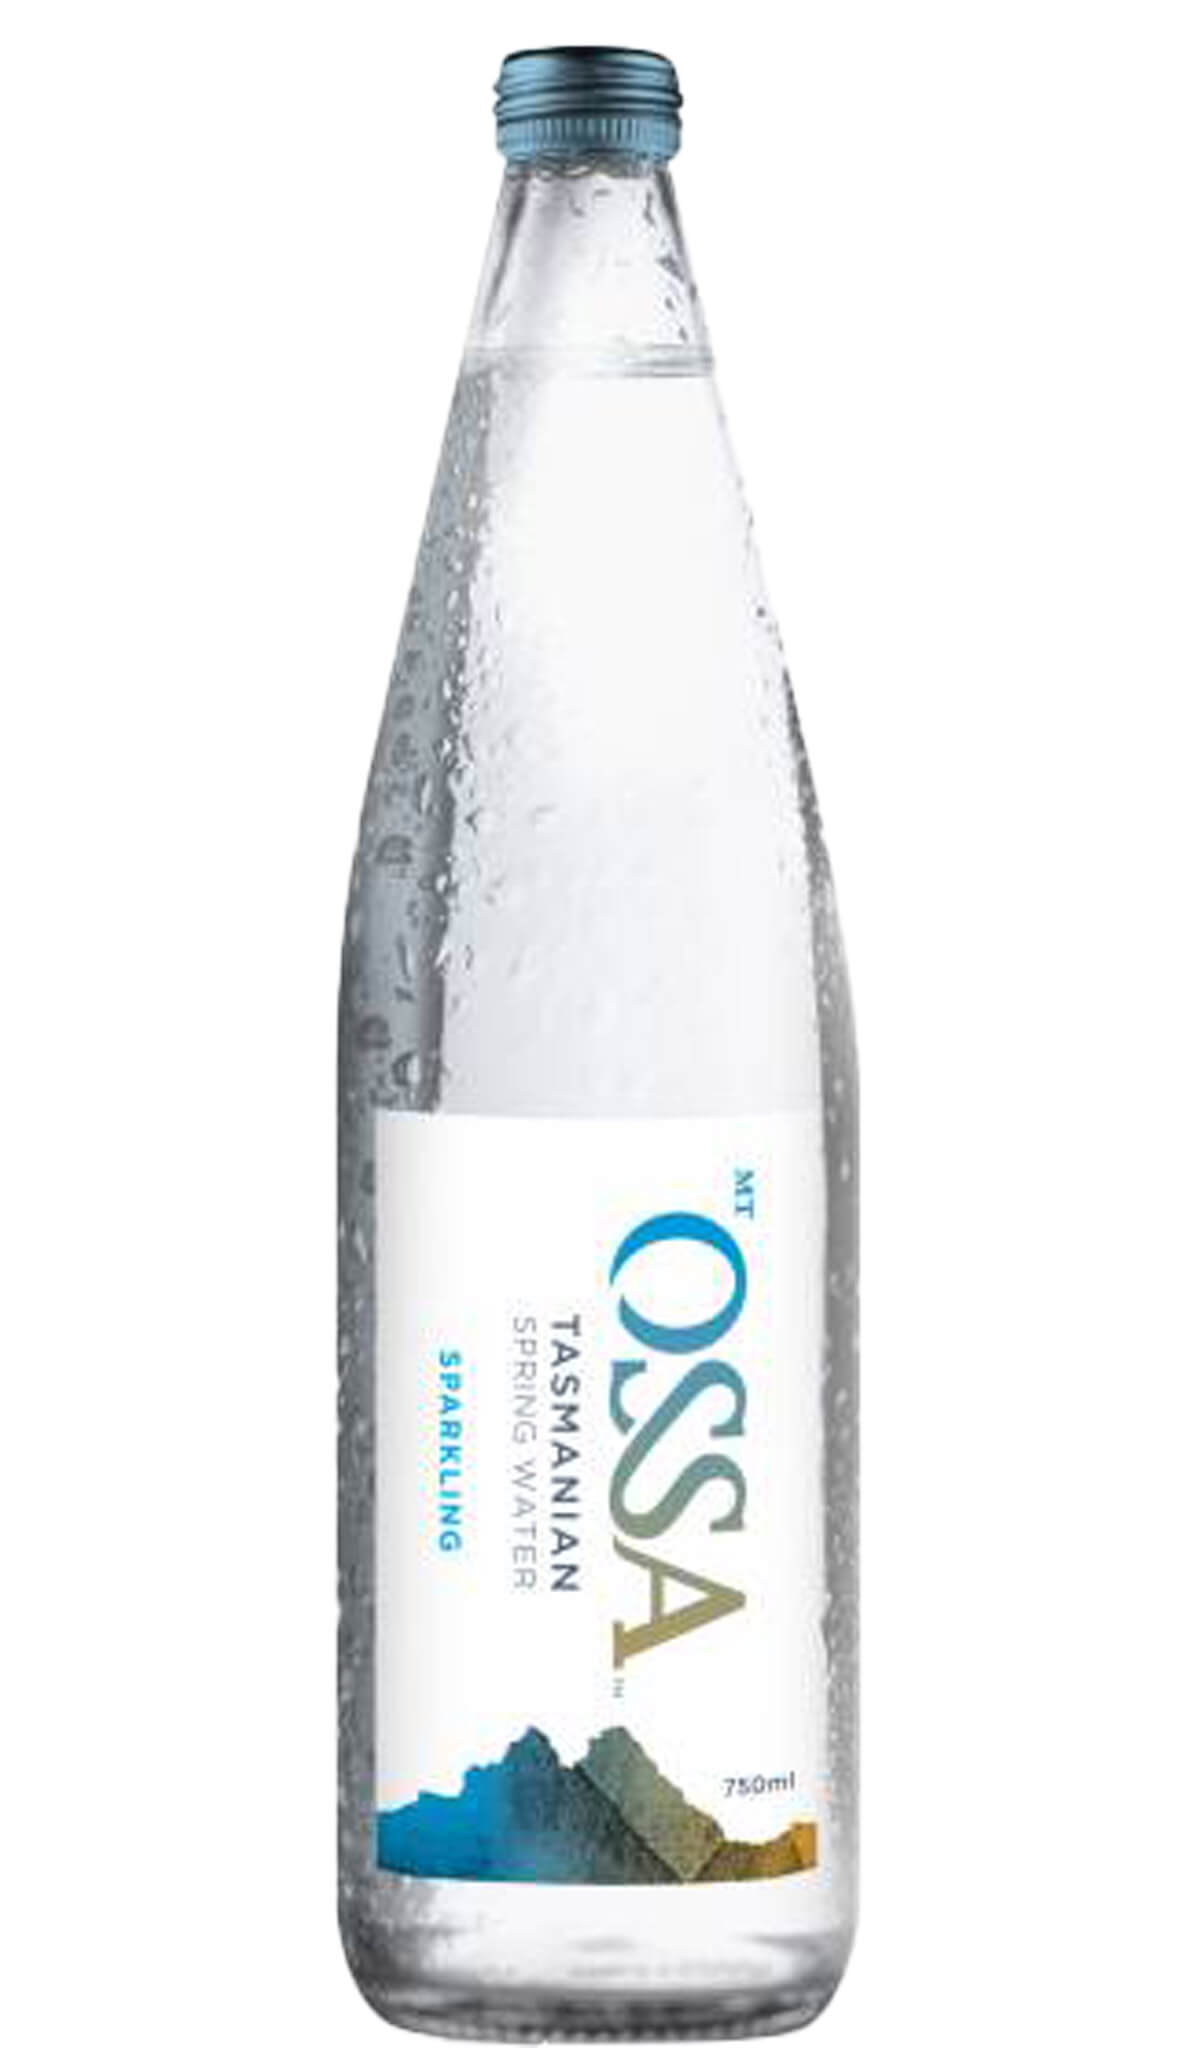 Find out more, explore the range and purchase Mt Ossa Tasmanian Spring Water Sparkling 750mL available online at Wine Sellers Direct - Australia's independent liquor specialists.